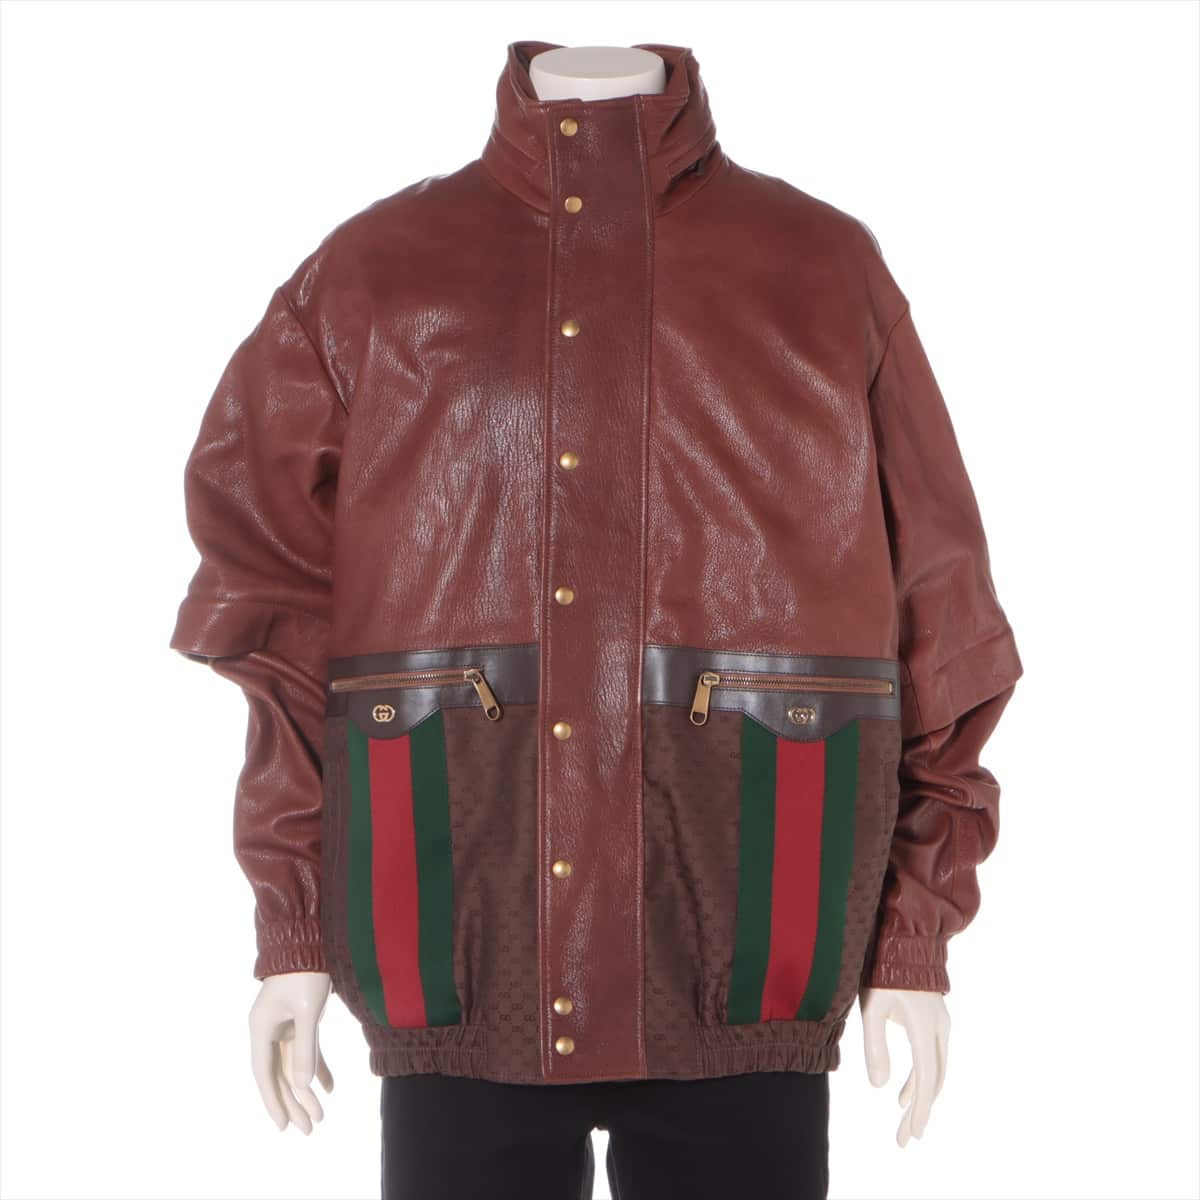 Gucci Interlocking G Lam Leather jacket 50 Men's Brown  624737 Web Removable sleeves